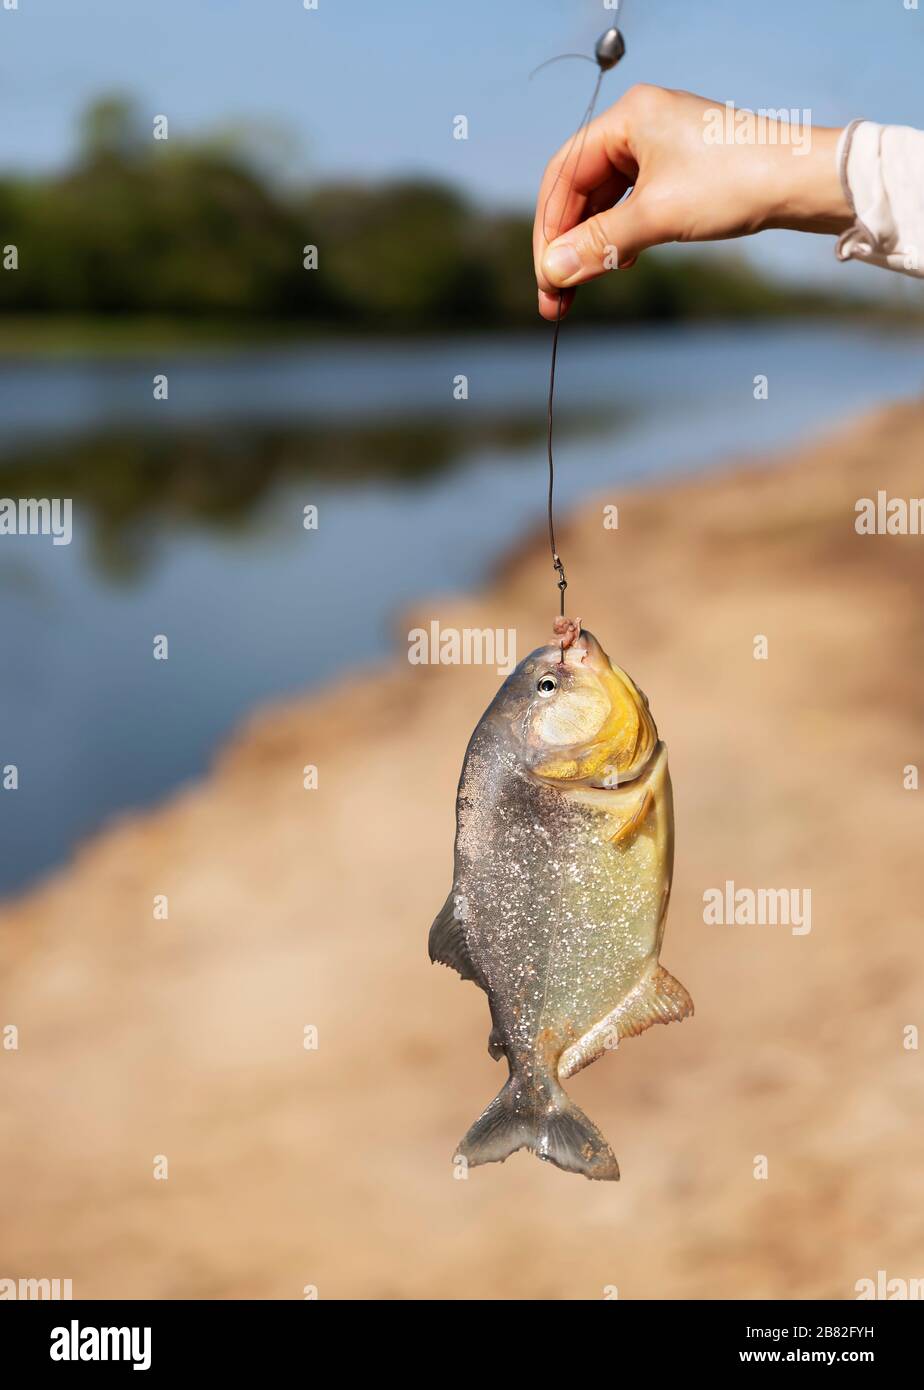 Piranha Fish Hanging By Fishing Line Stock Photo by ©ammmit 88024946